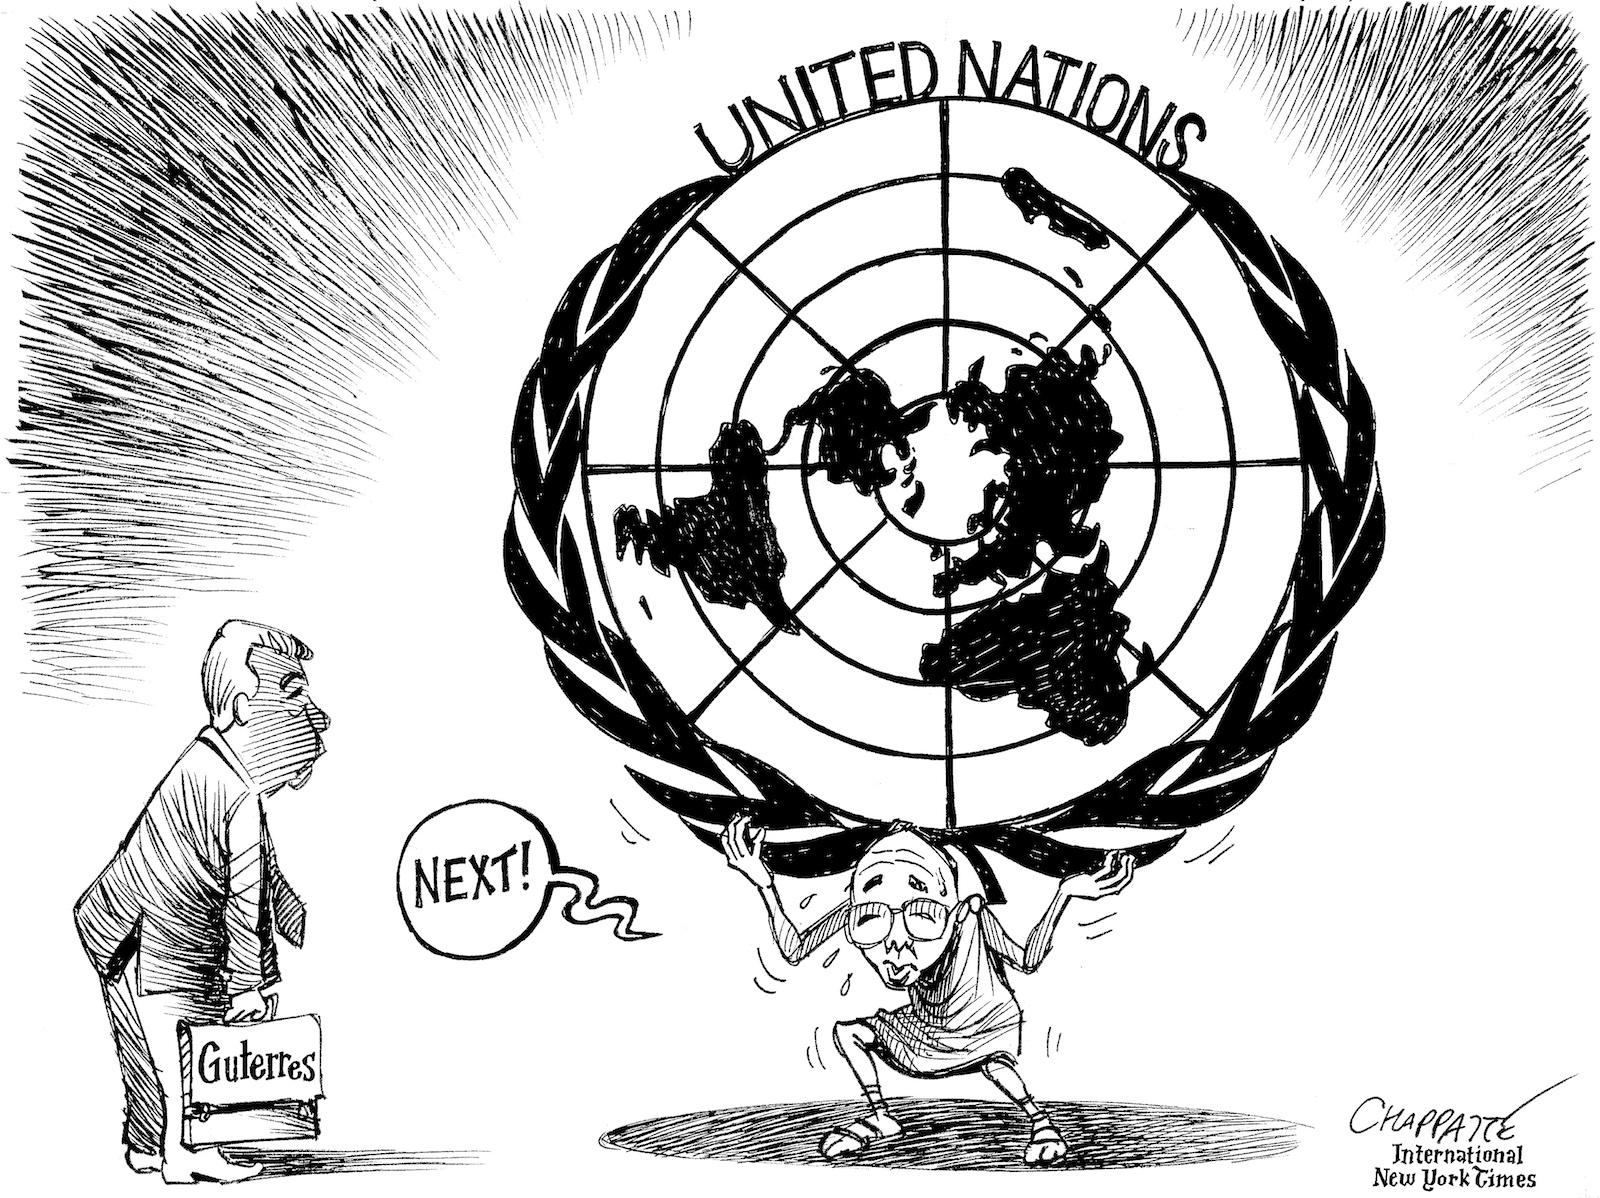 A new chief for the U.N.